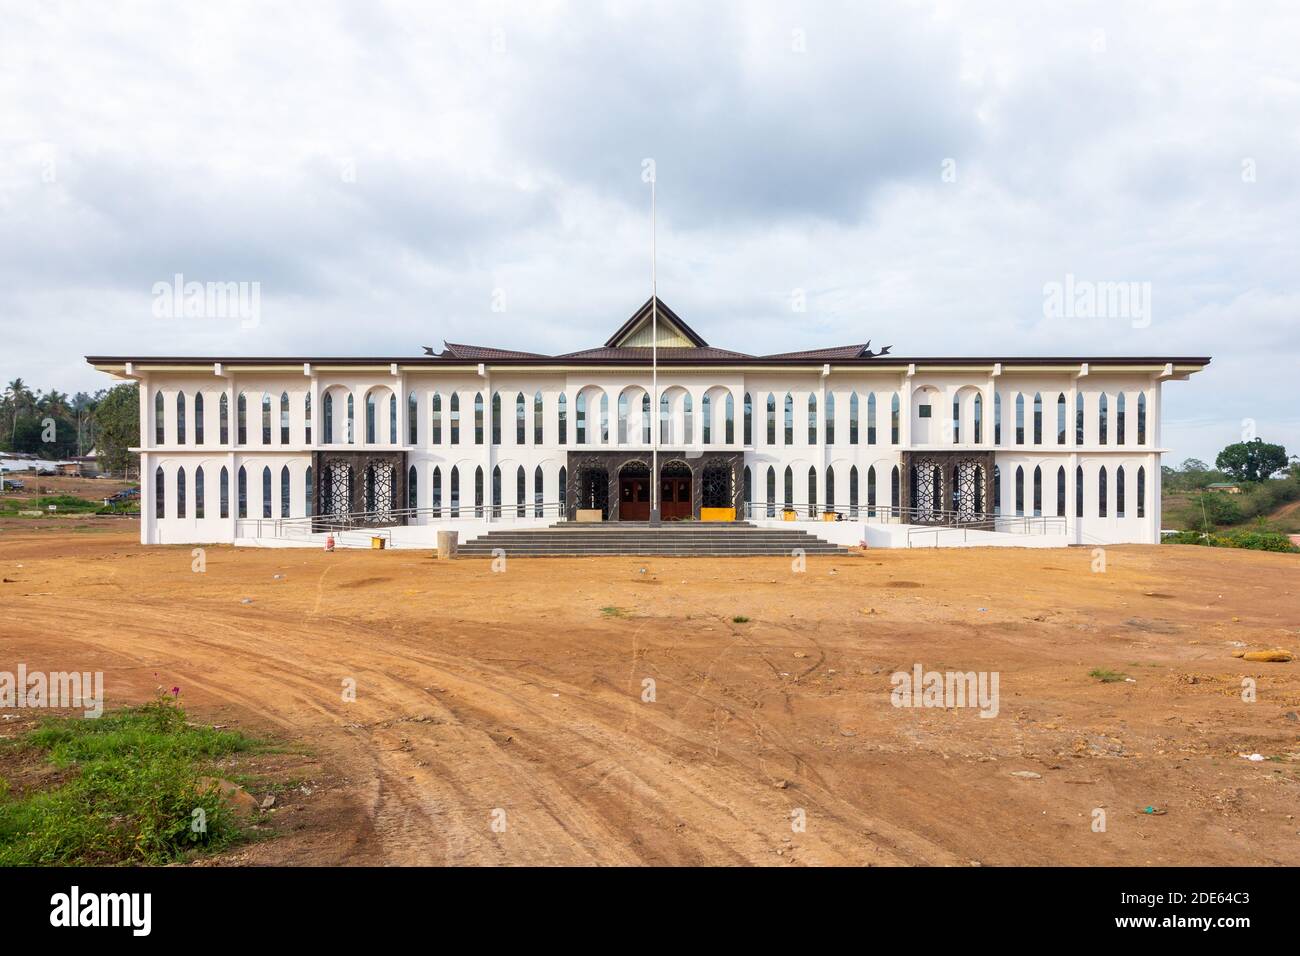 The BARMM complex building in Lamitan in Basilan Island, Philippines Stock Photo